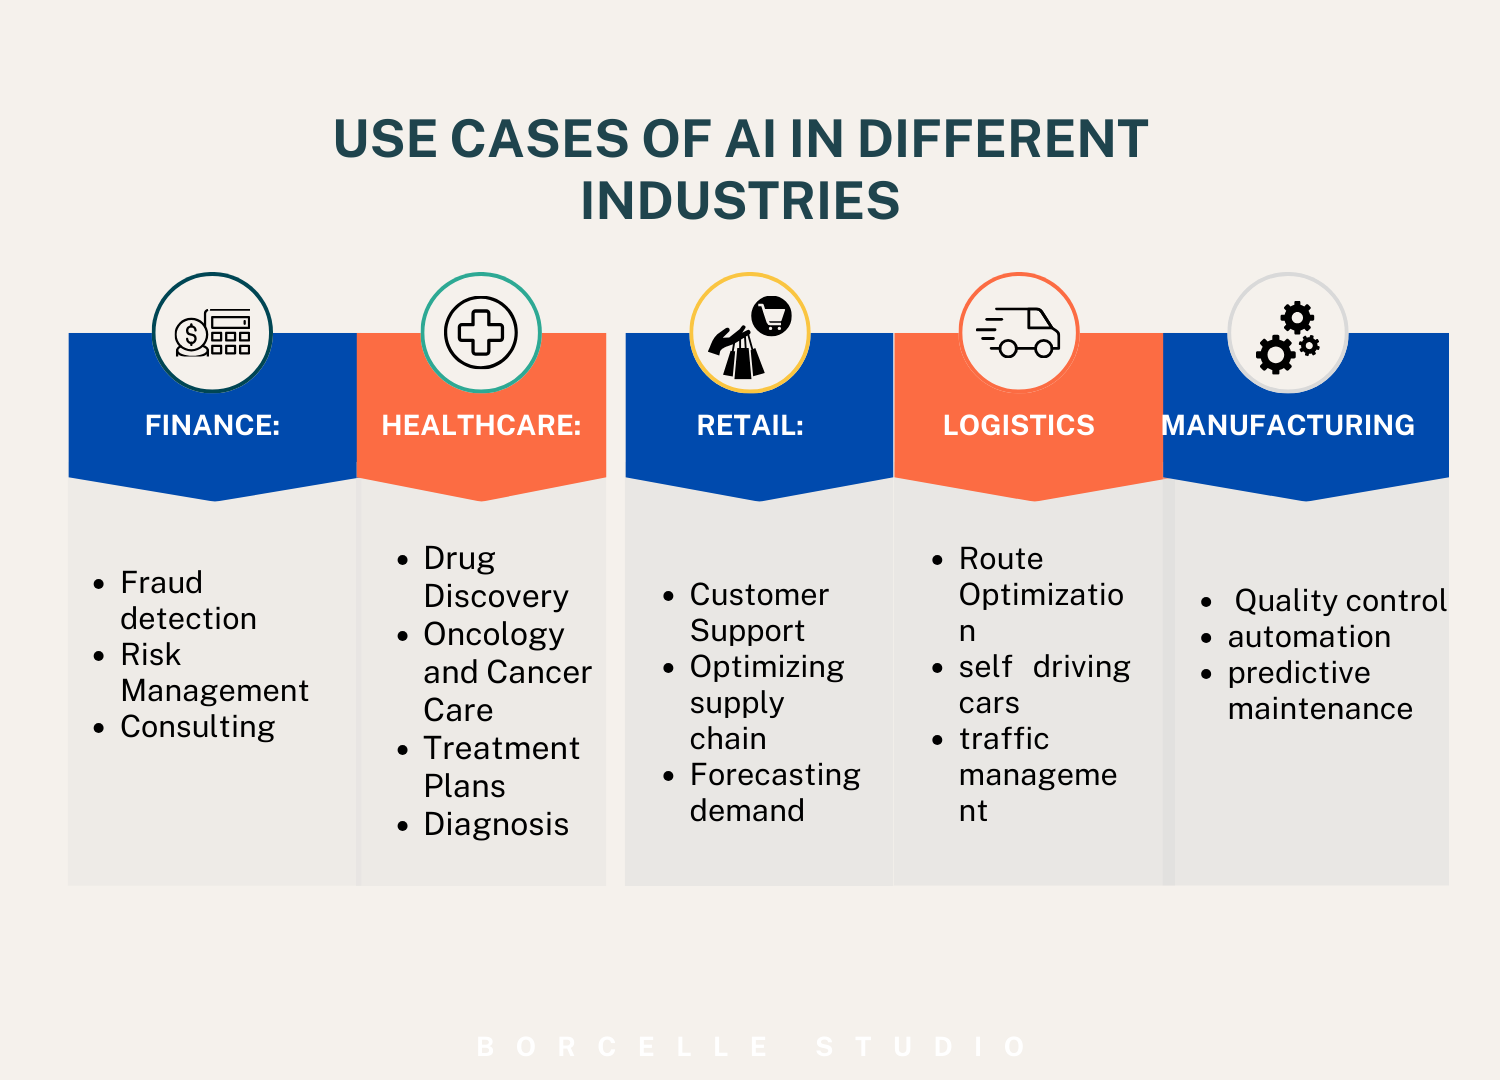 Use Cases of AI in Industries